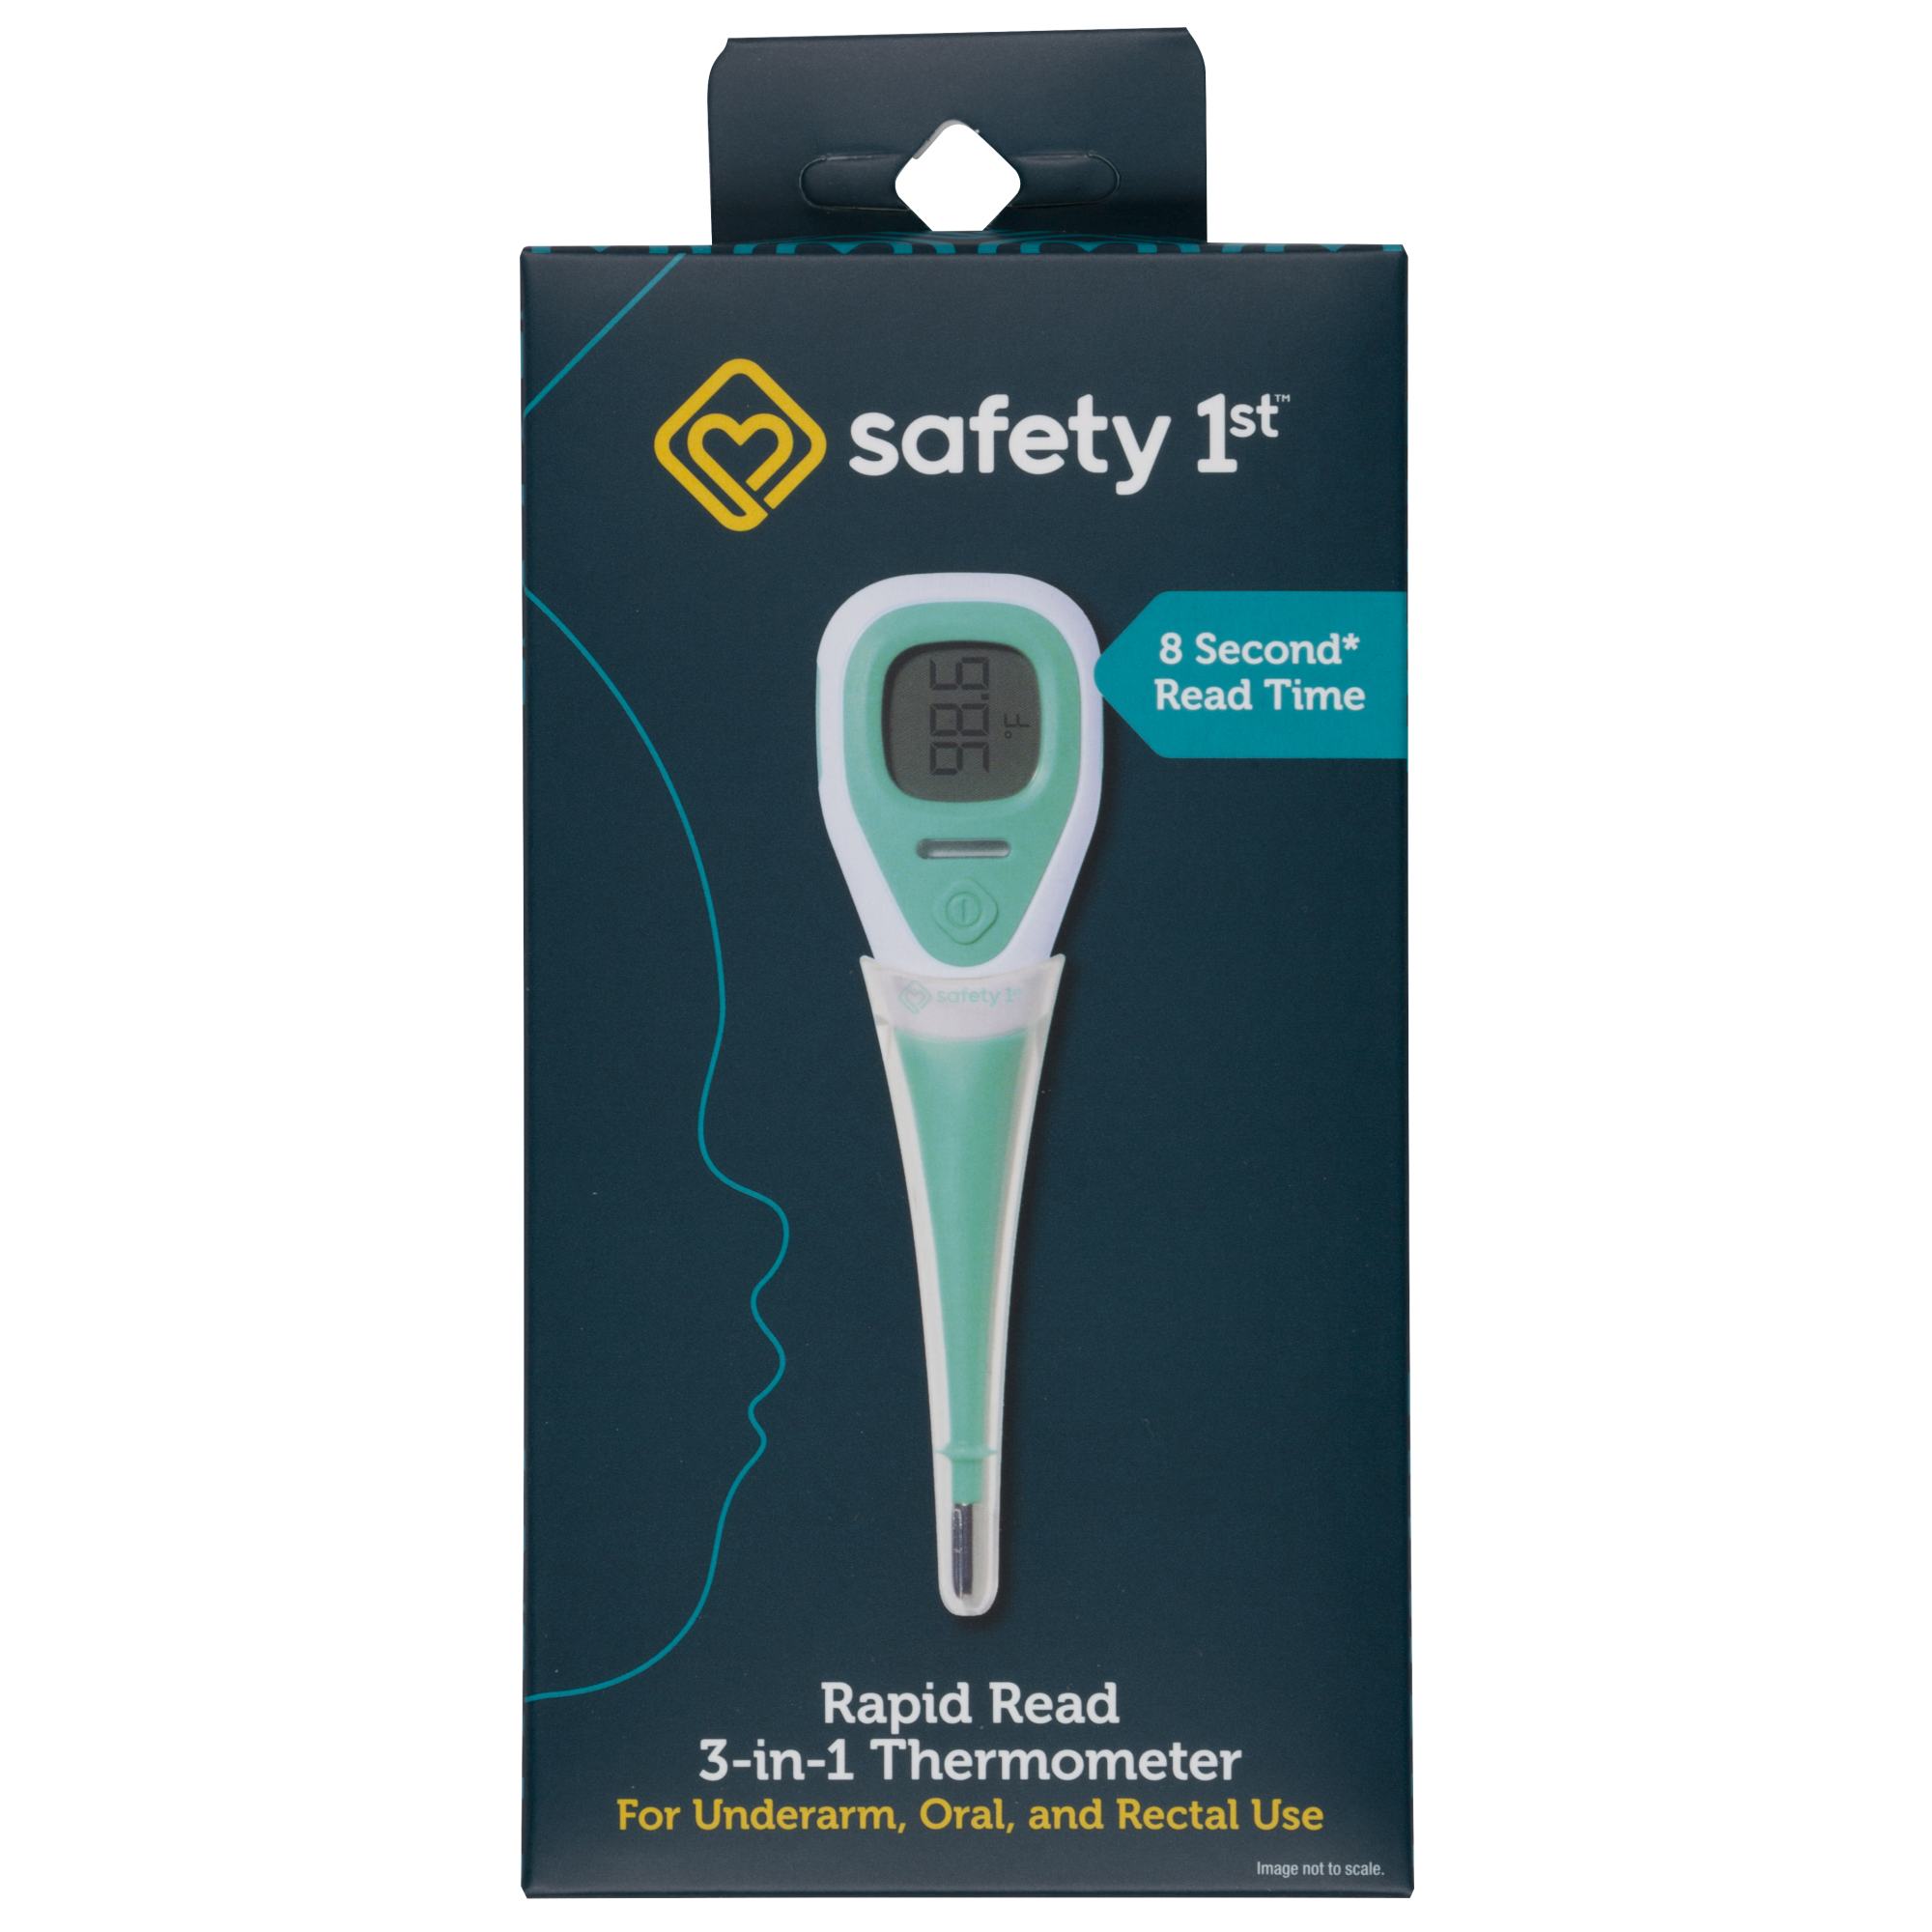 Rapid Read 3-in-1 Thermometer in packaging - for underarm, oral, and rectal use